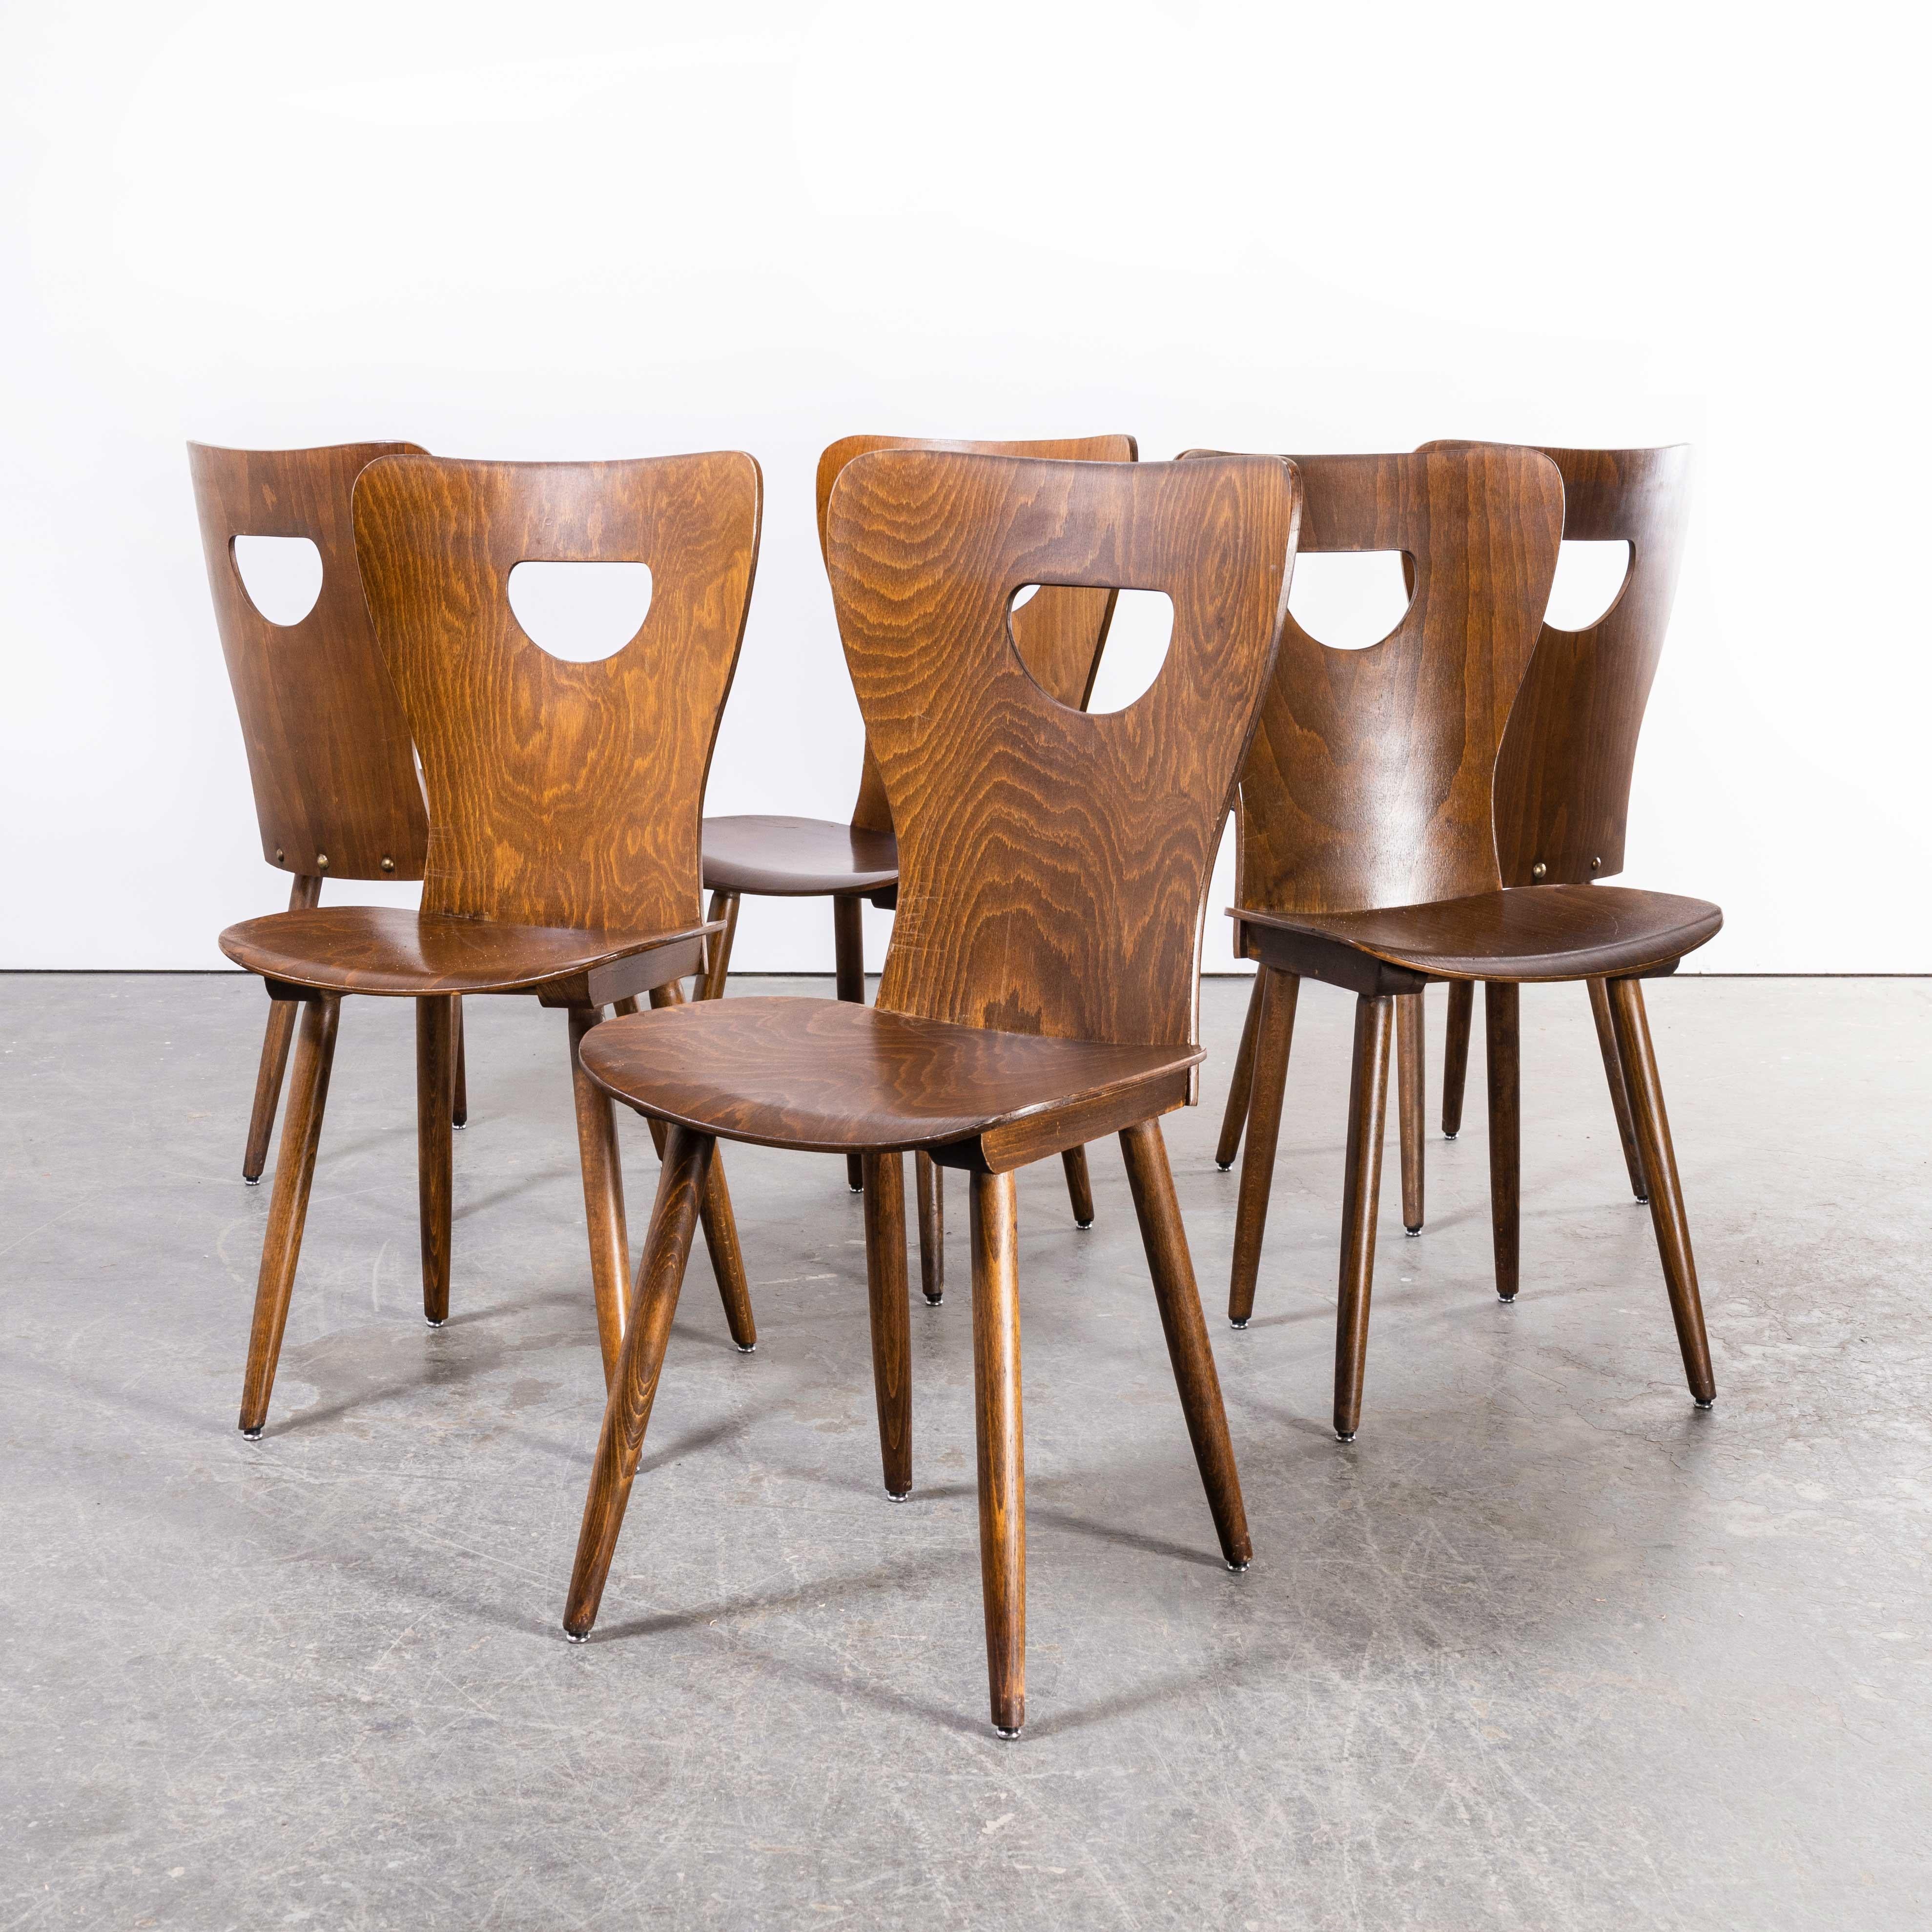 1950s French Baumann bentwood classic shaped dining chair – set of six
1950s French Baumann bentwood classic shaped dining chair – set of six. Classic beech bistro chair made in France by the maker Baumann. Baumann is a slightly off the radar